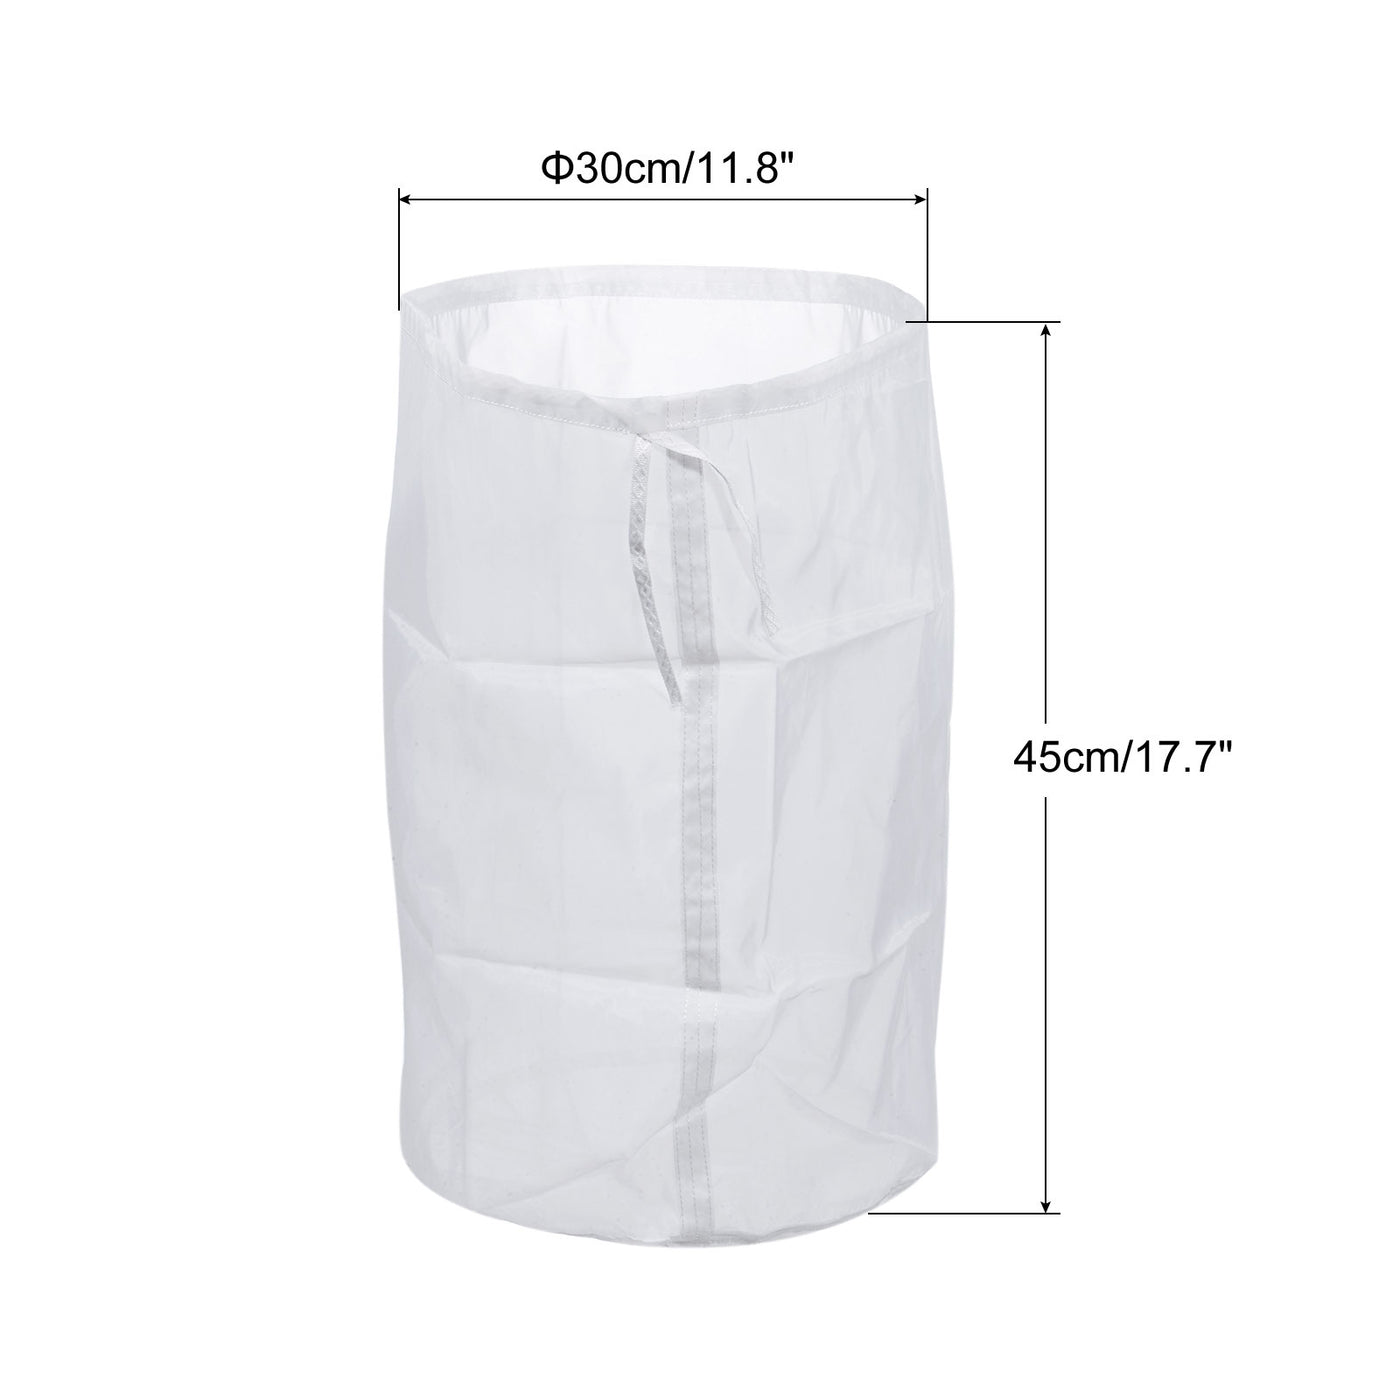 uxcell Uxcell 160 Mesh Paint Filter Bag 11.8" Dia Nylon Strainer with Drawstring for Filtering